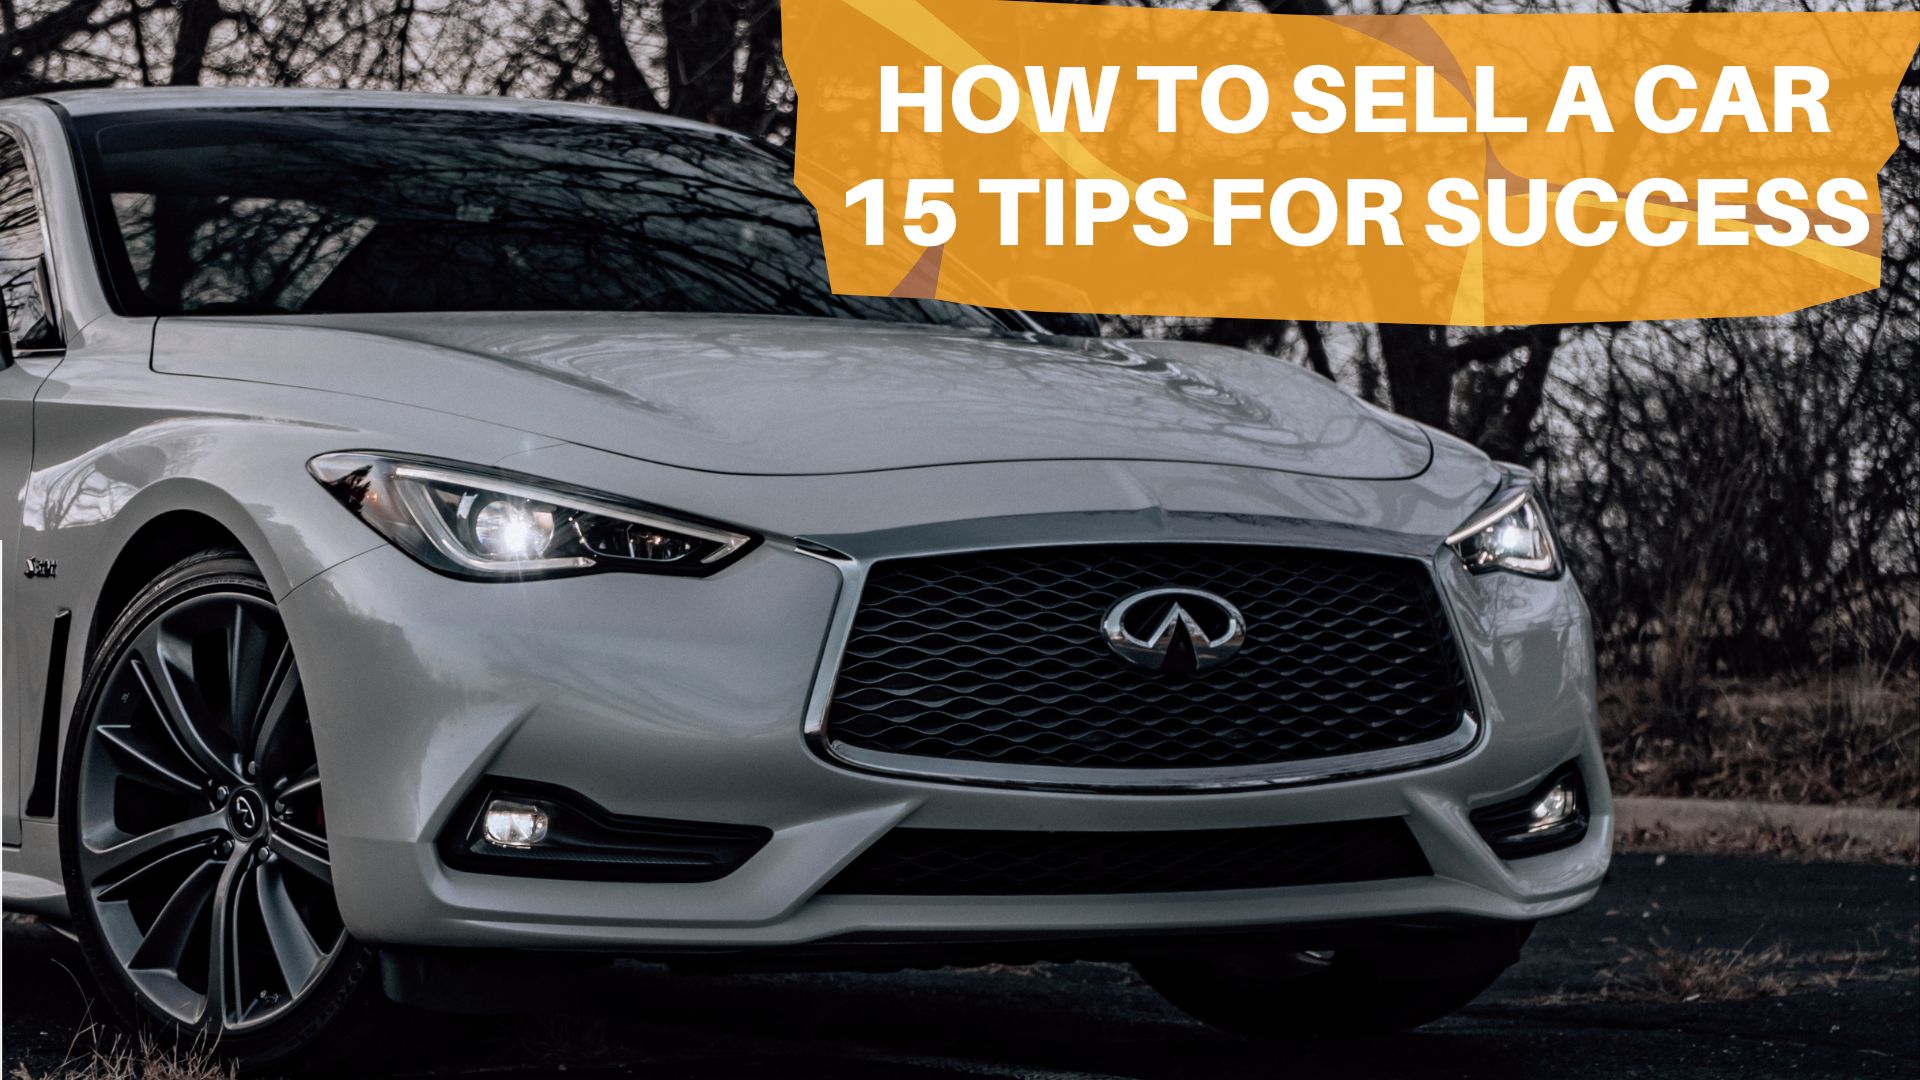 How To Sell A Car 15 Tips For Success